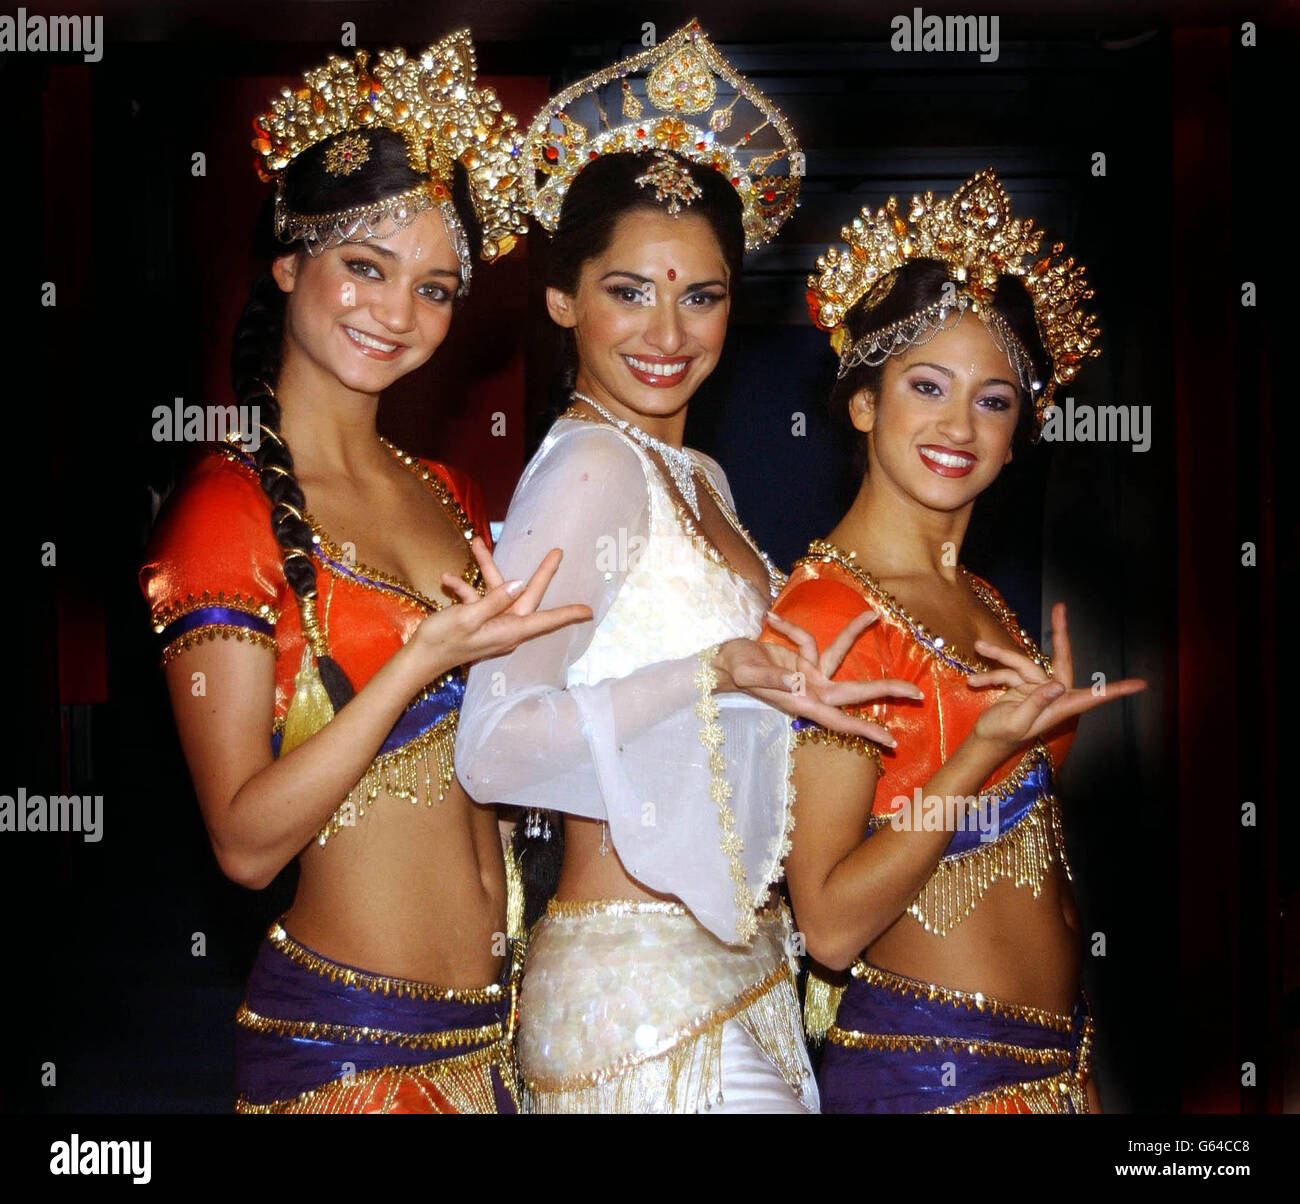 Members of Bombay Dreams cast, from left to right; Angela, Ayesha Dharker and Kella during a photocall at the Indian pavillion to help promote Indian tourism, part of the World Travel Market at London's EXCEL exhibition centre in the Docklands. Stock Photo